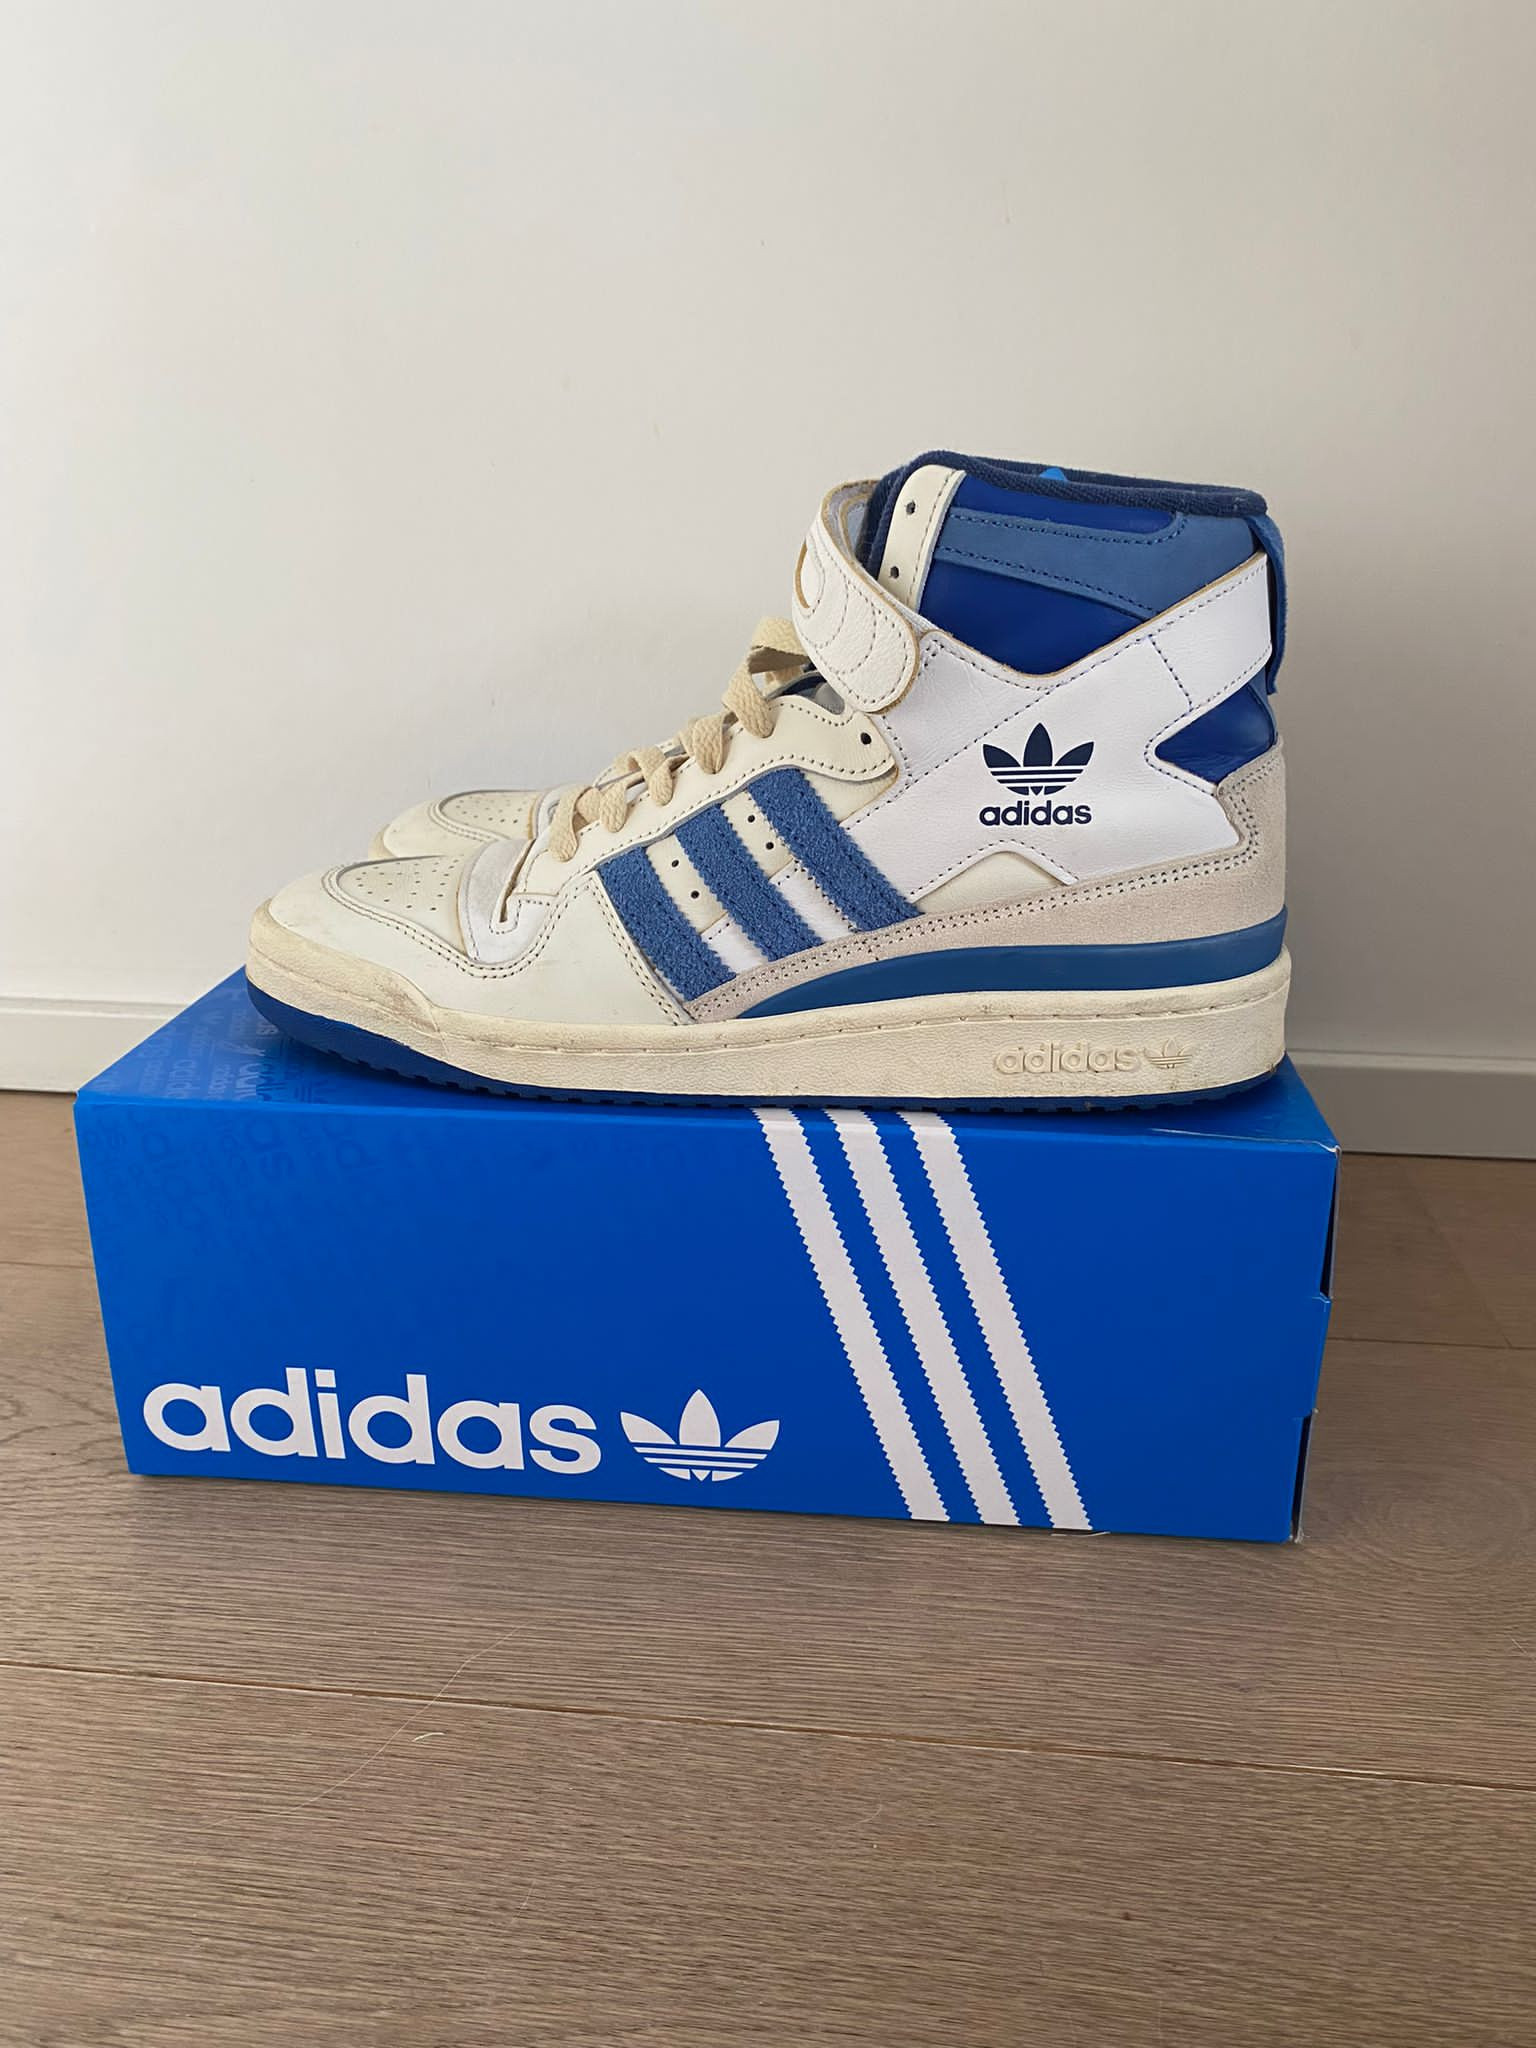 Adidas Forum trainers size 42.5